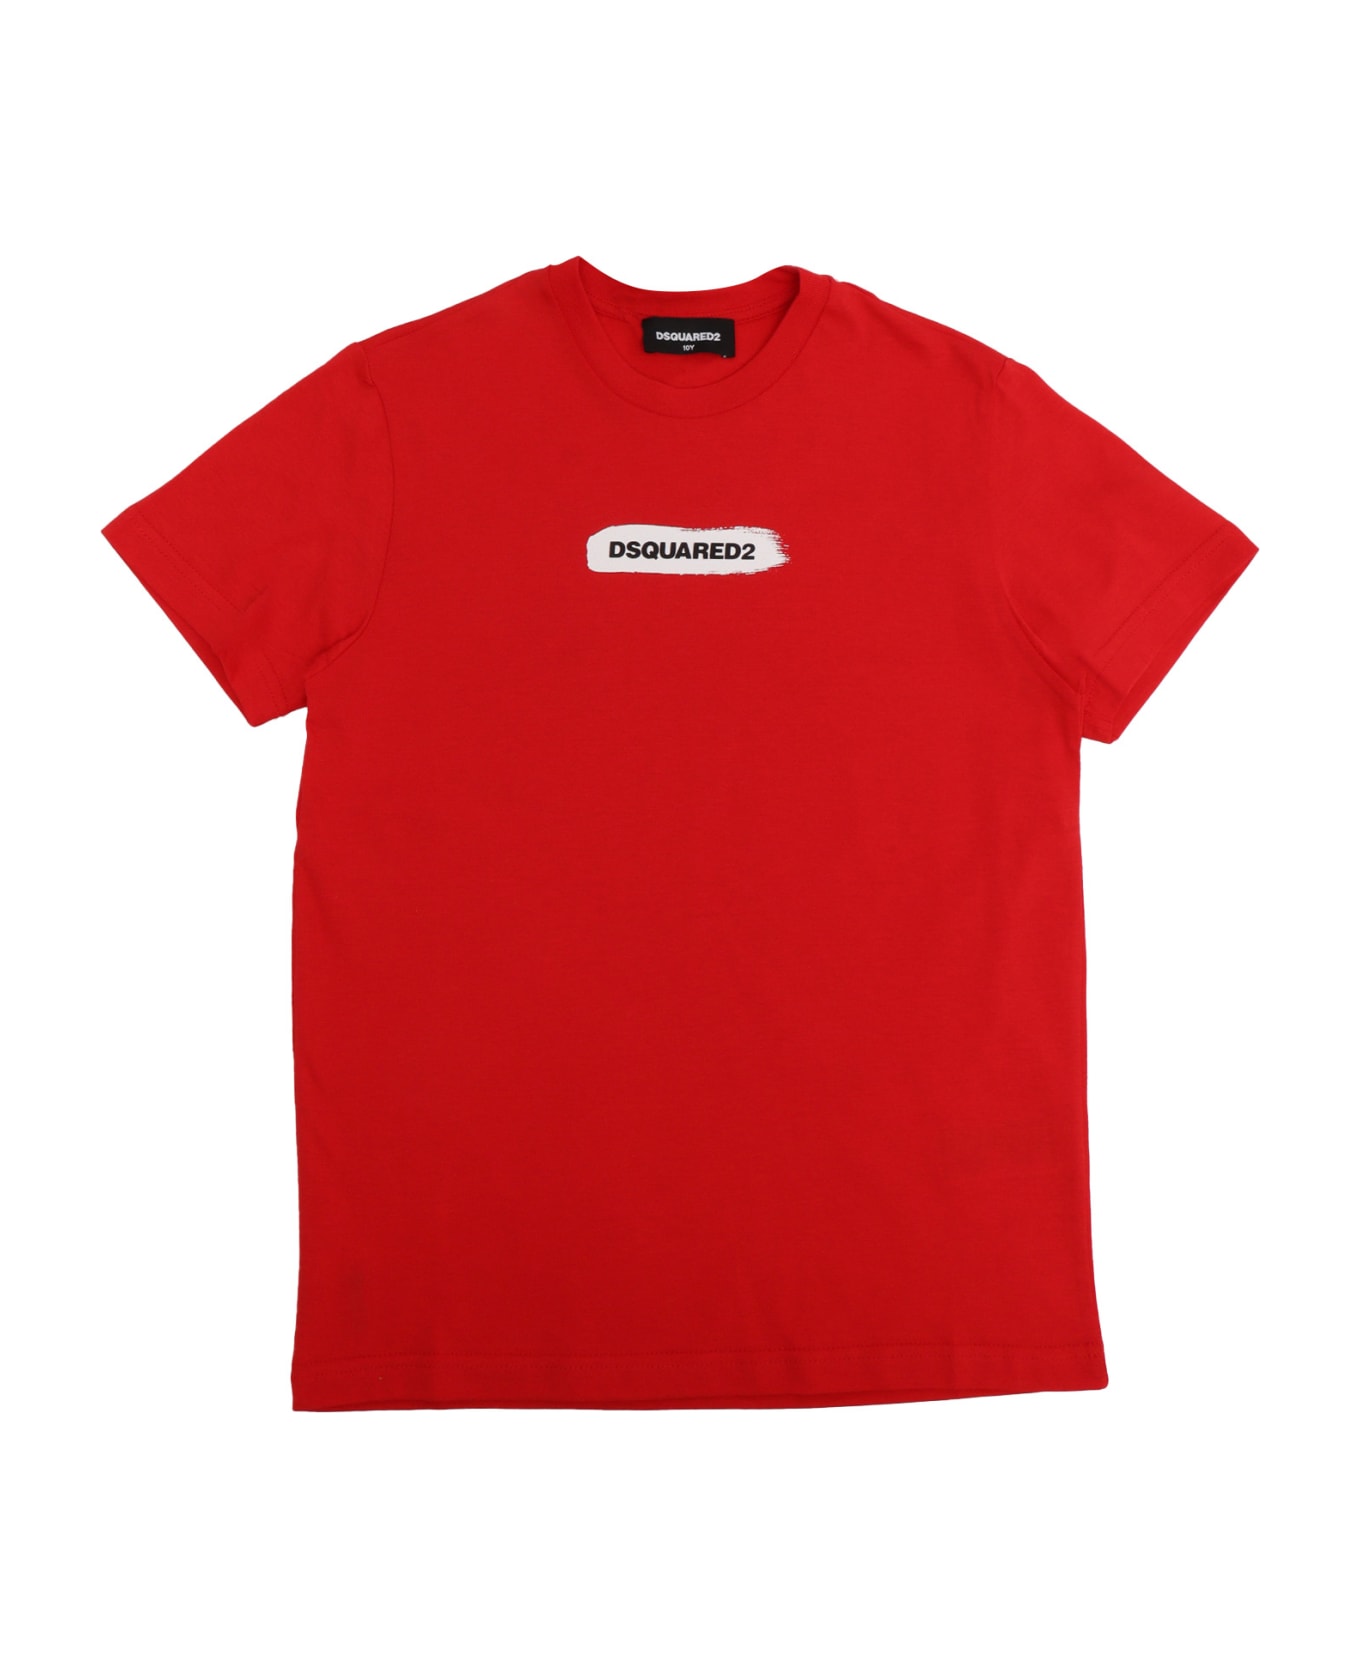 Dsquared2 D-squared2 T-shirt - RED